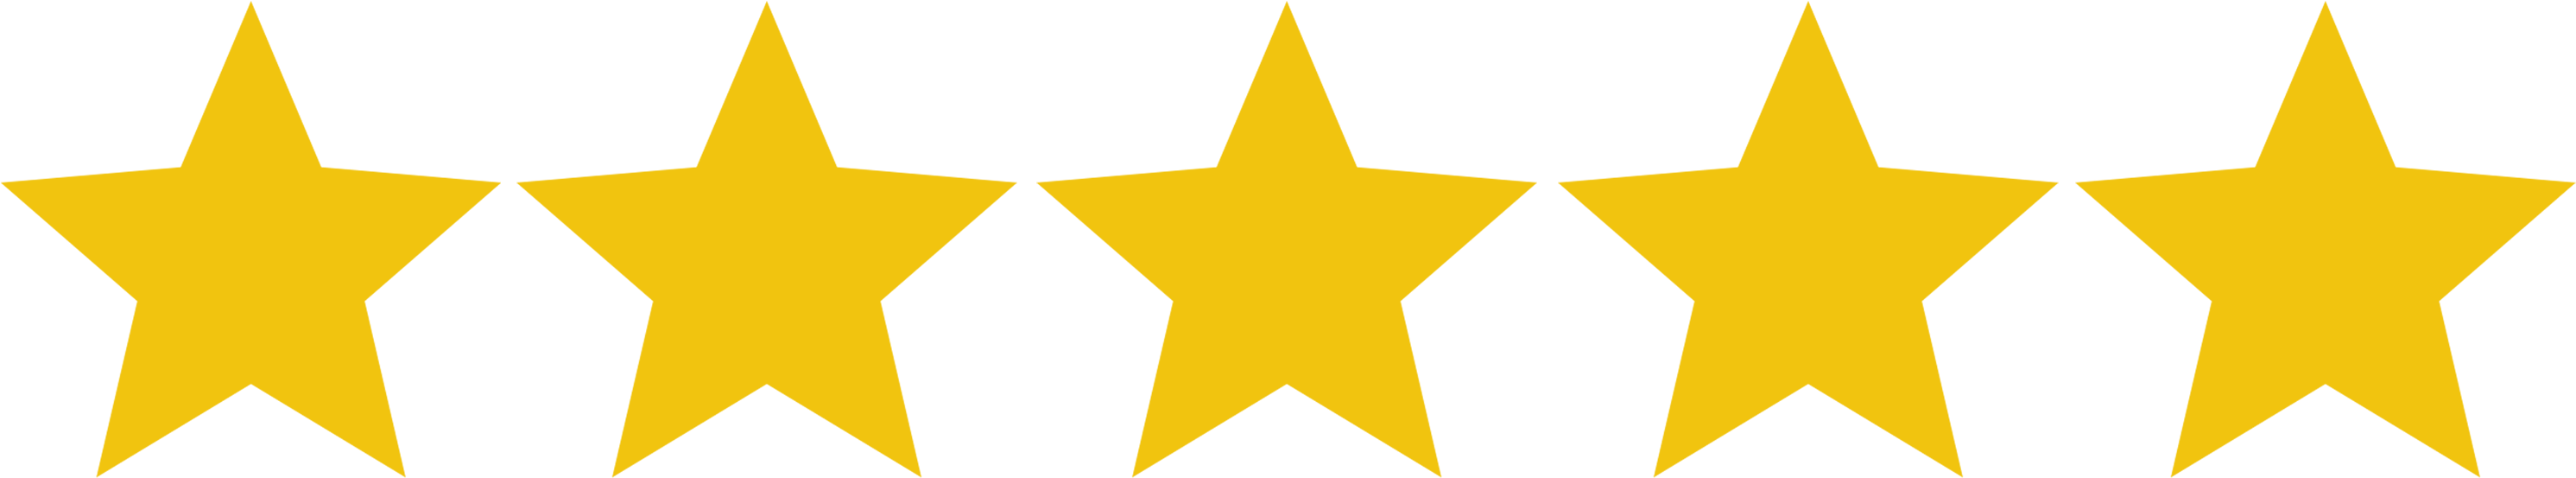 Free Review Stars Png, Download Free Review Stars Png png images, Free ...